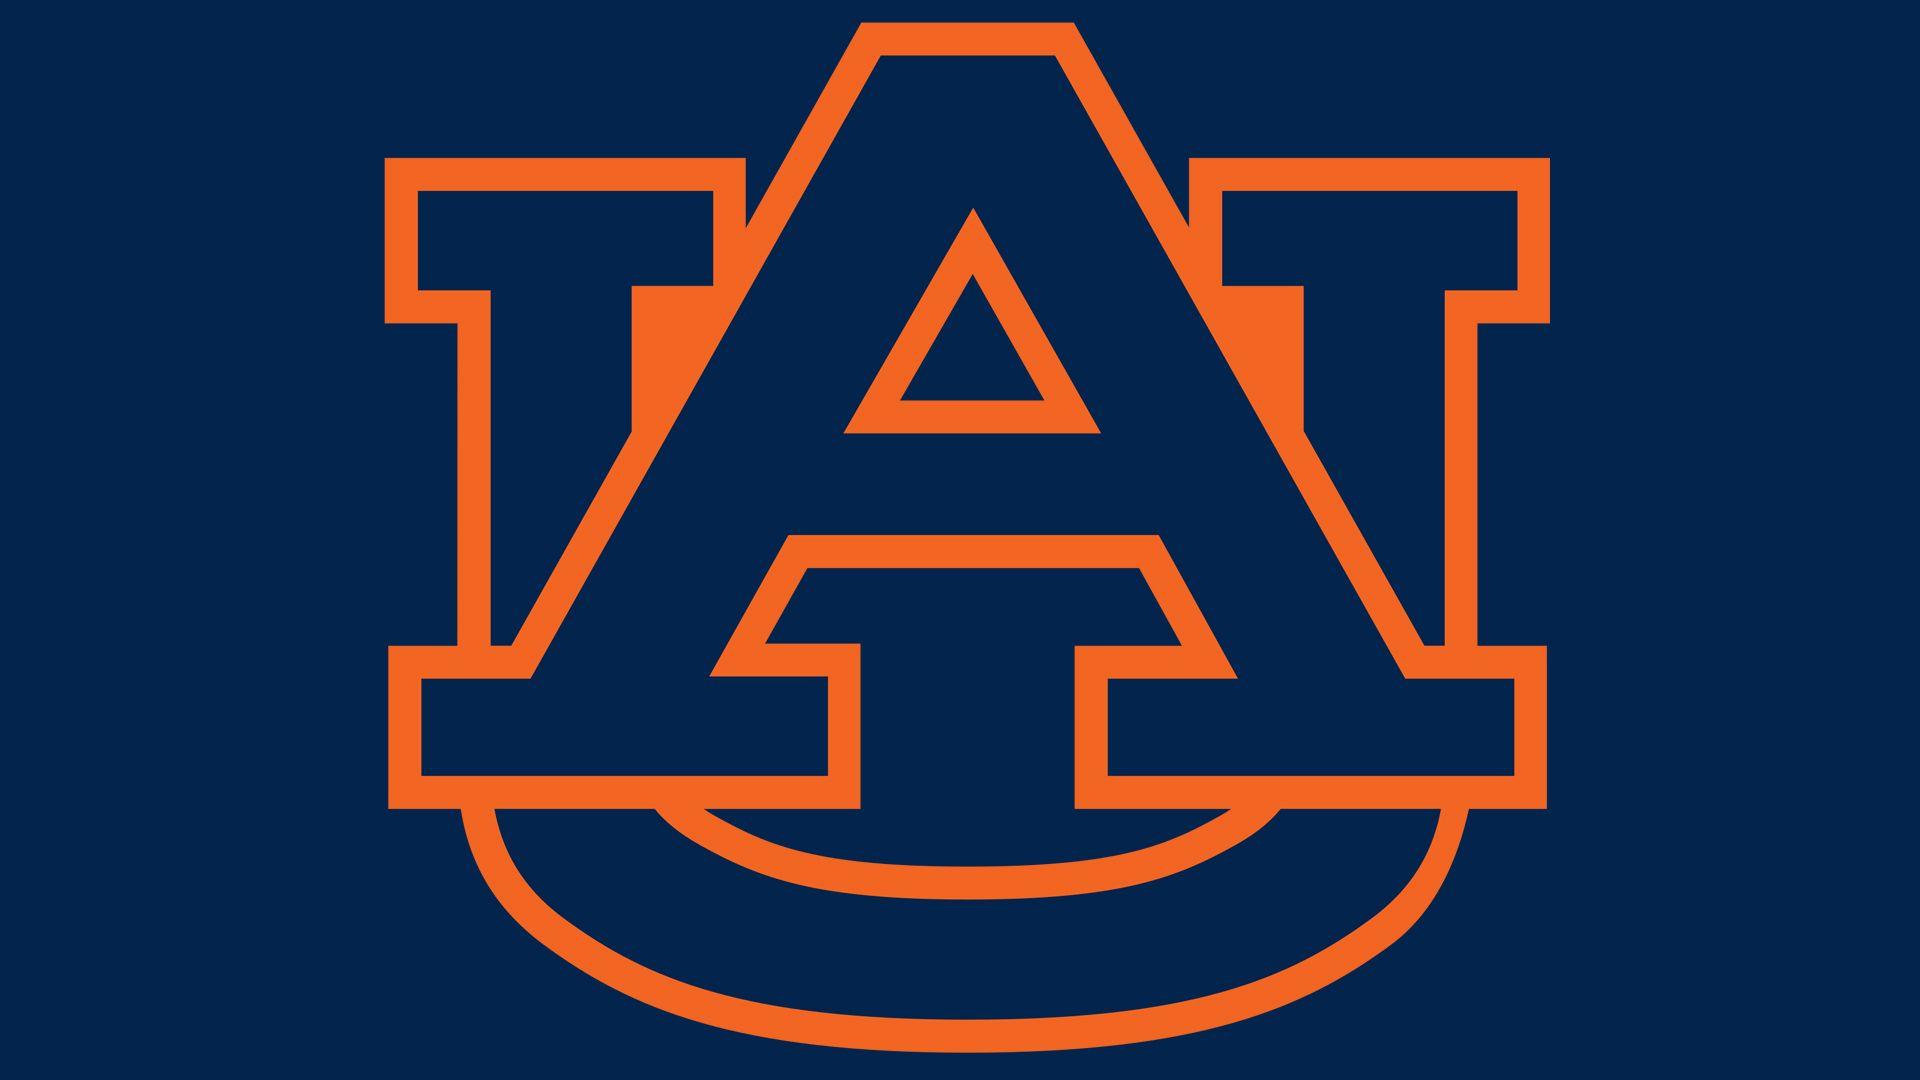 Auburn Logo - Auburn University Logo, Auburn University Symbol, Meaning, History